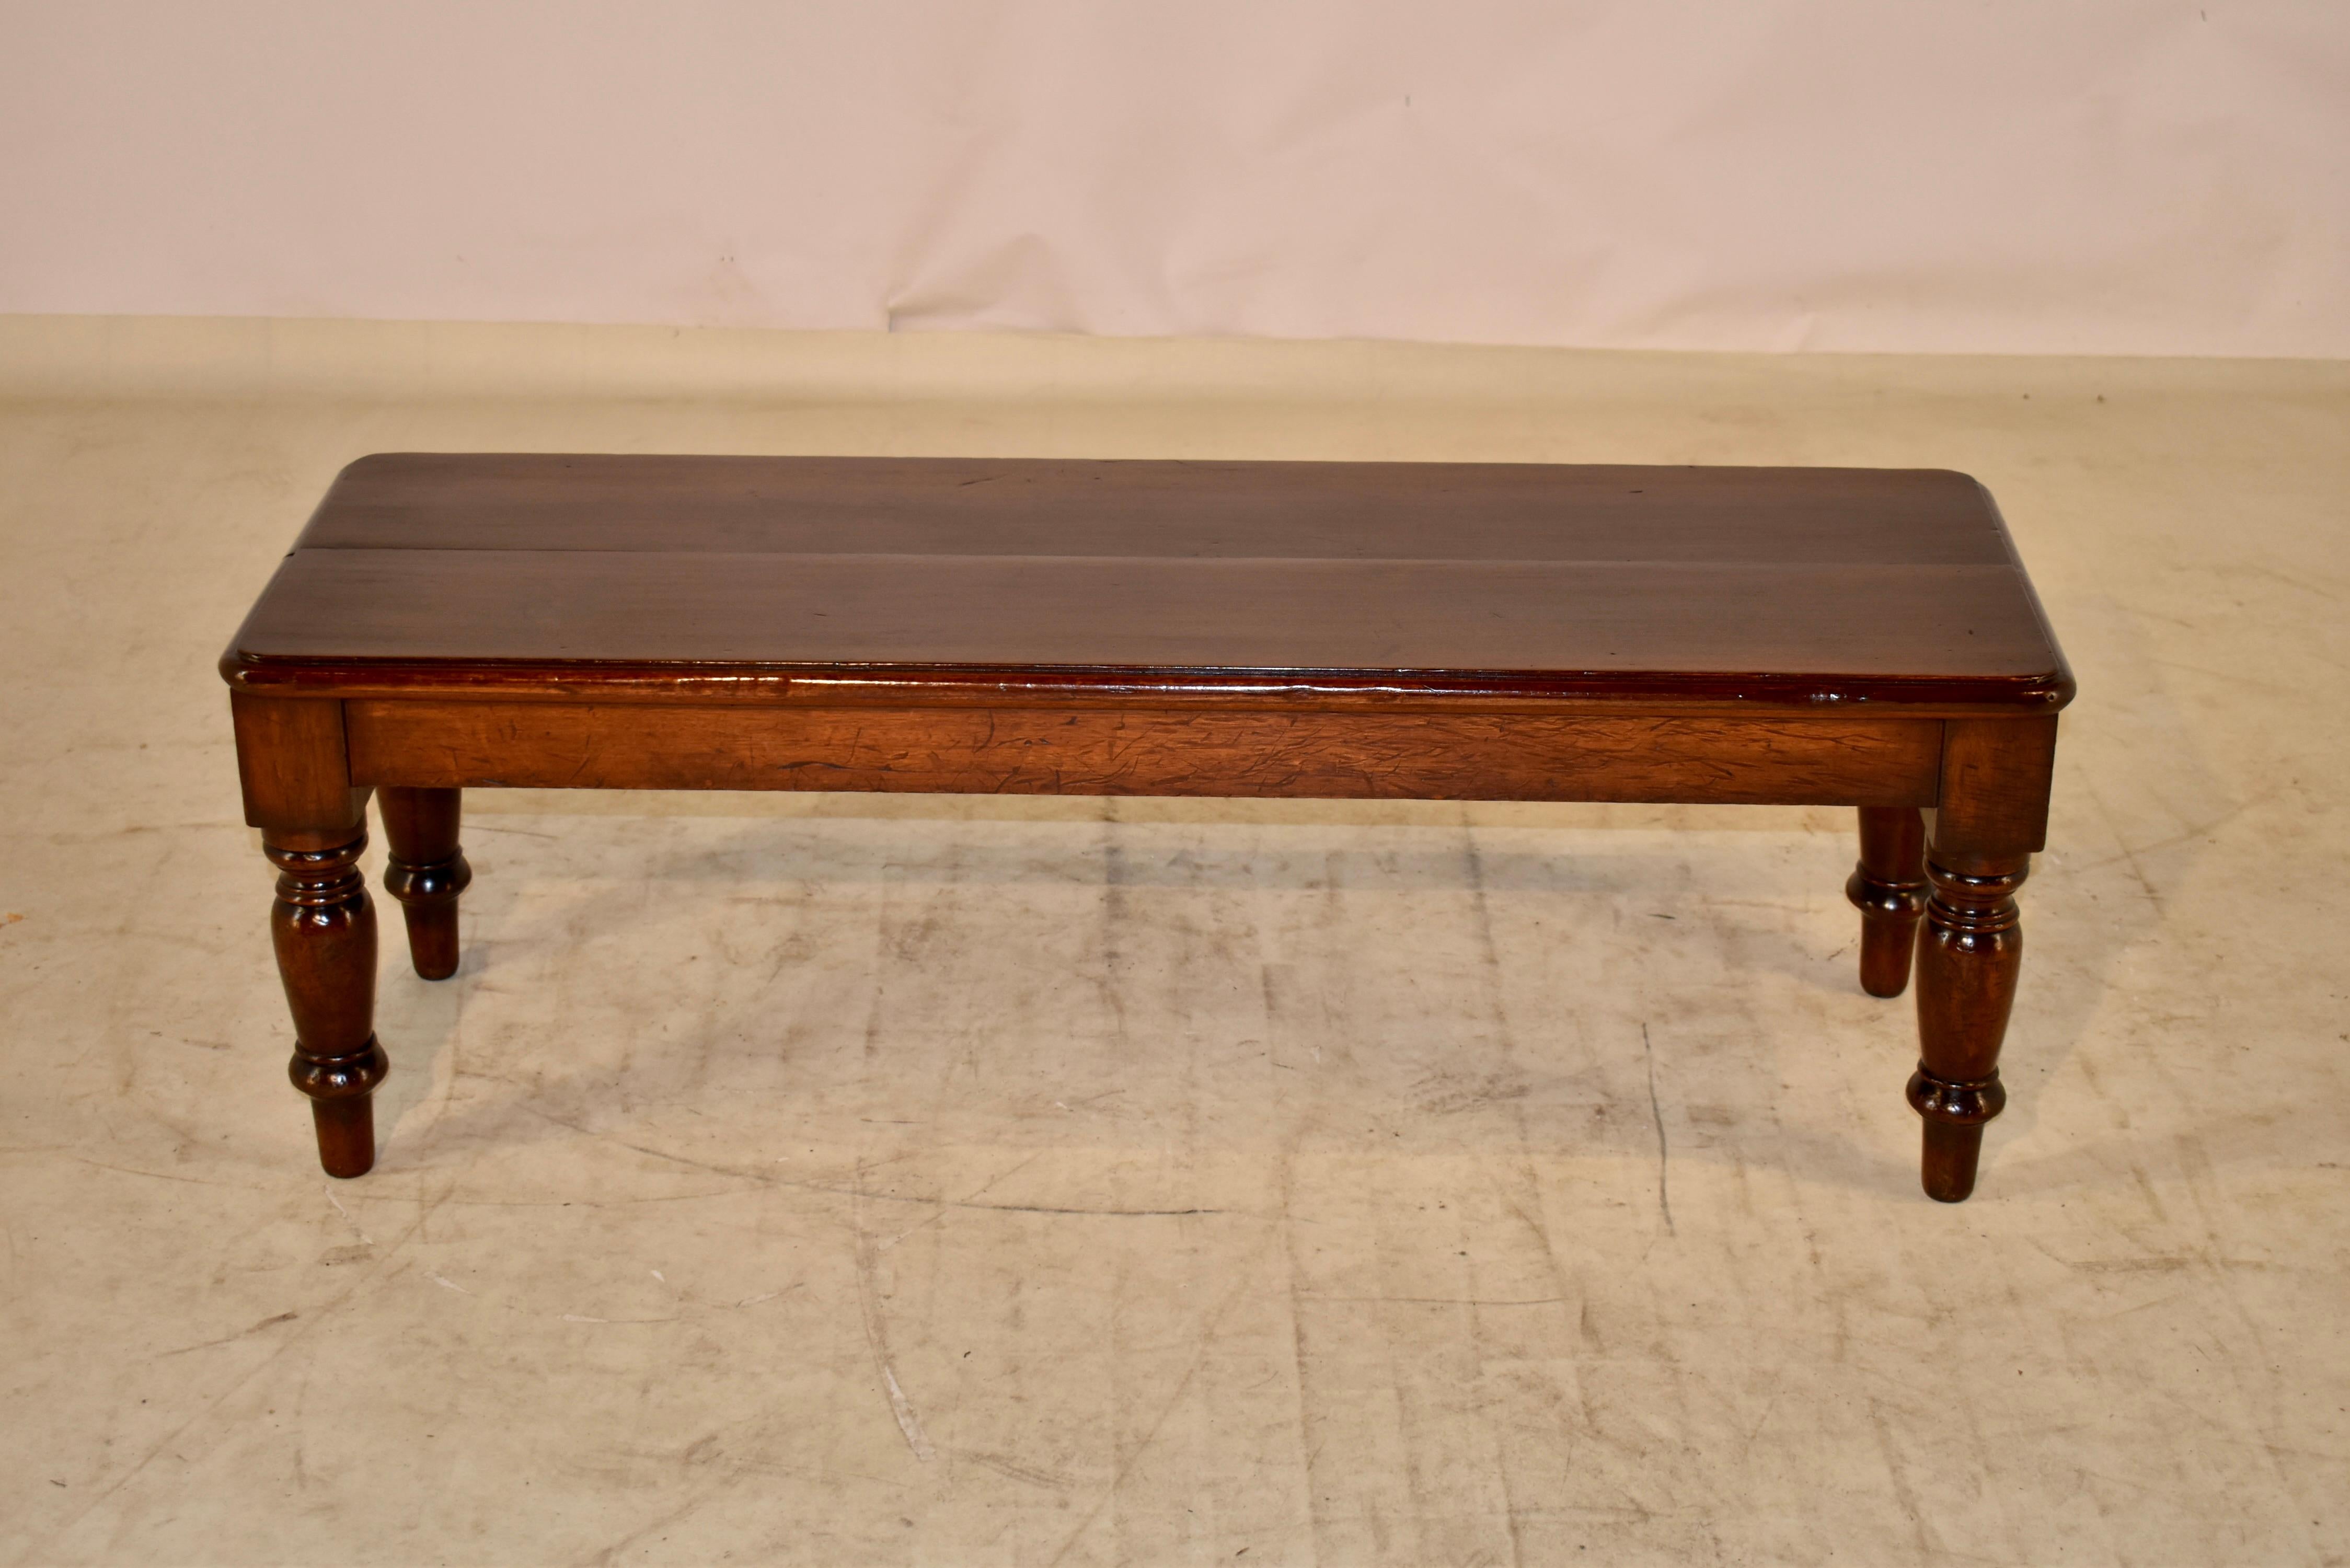 19th century mahogany bench from England.  The top is made from two boards, which are beveled along the edges for a more finished design.  The top is supported on a simple apron over hand turned legs.